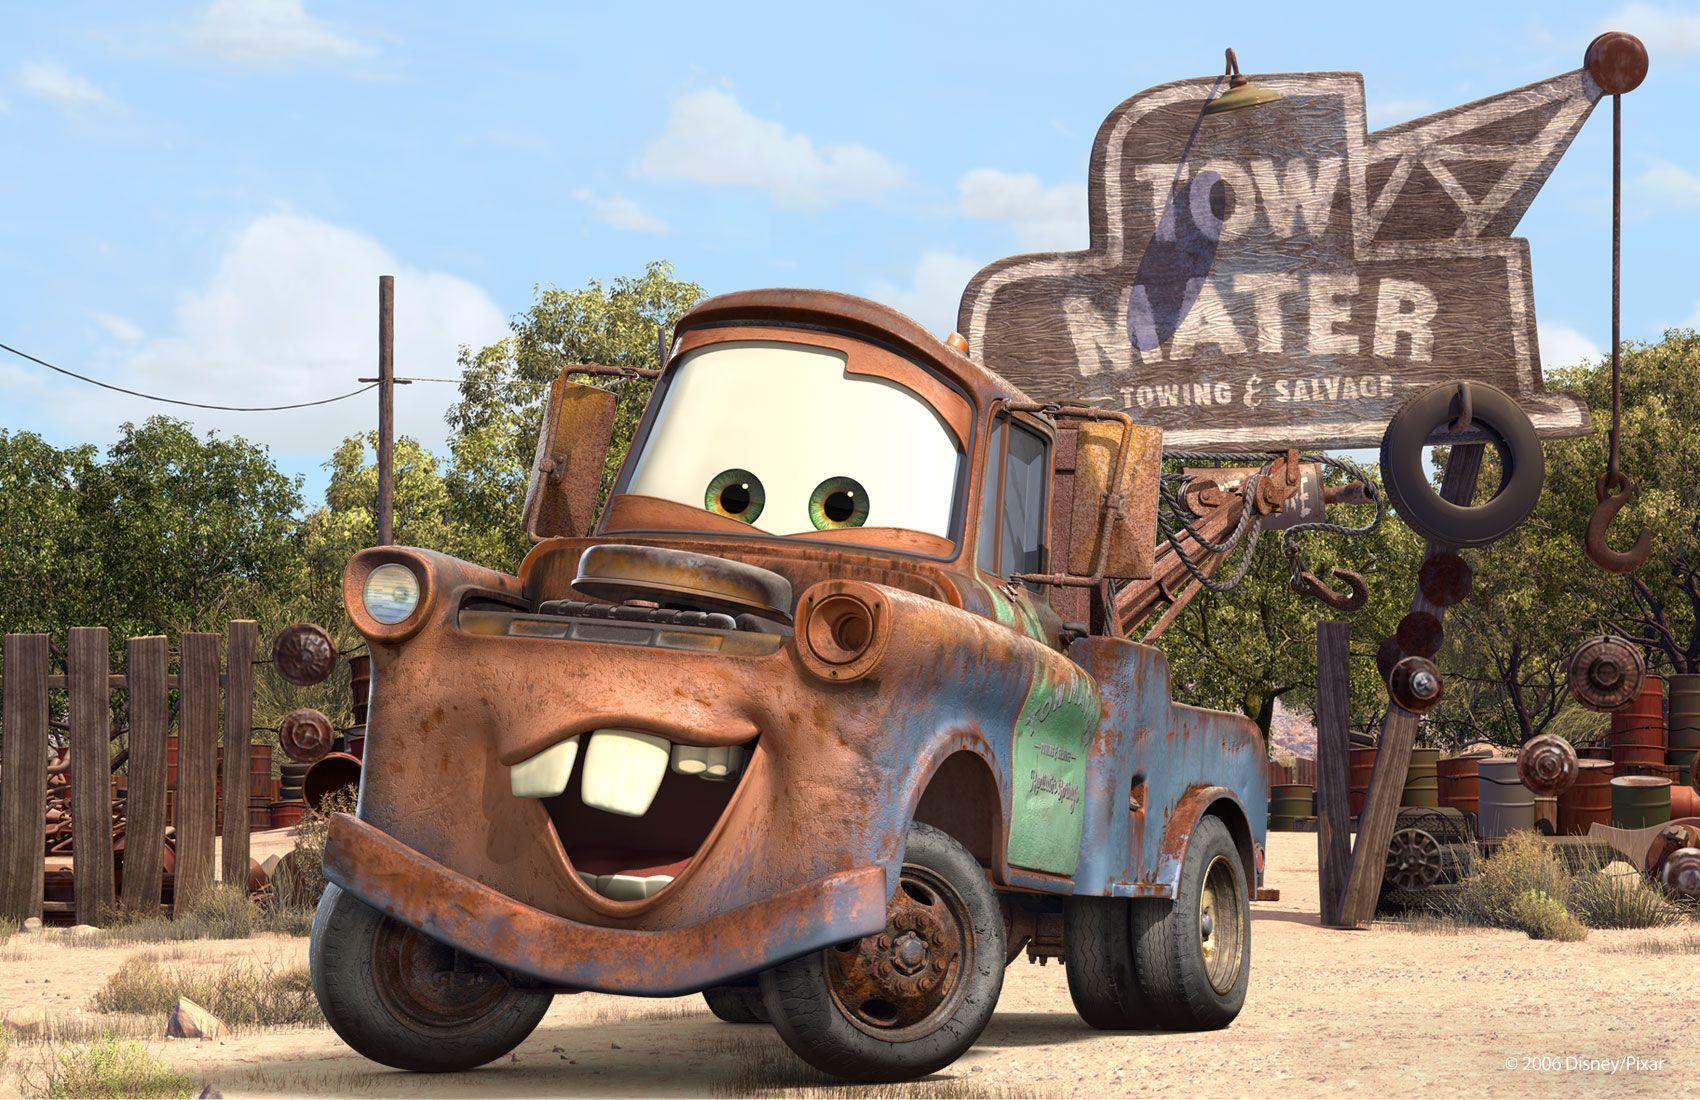 Tow Mater Logo - Tow Mater | The Pixar Cars Wiki | FANDOM powered by Wikia